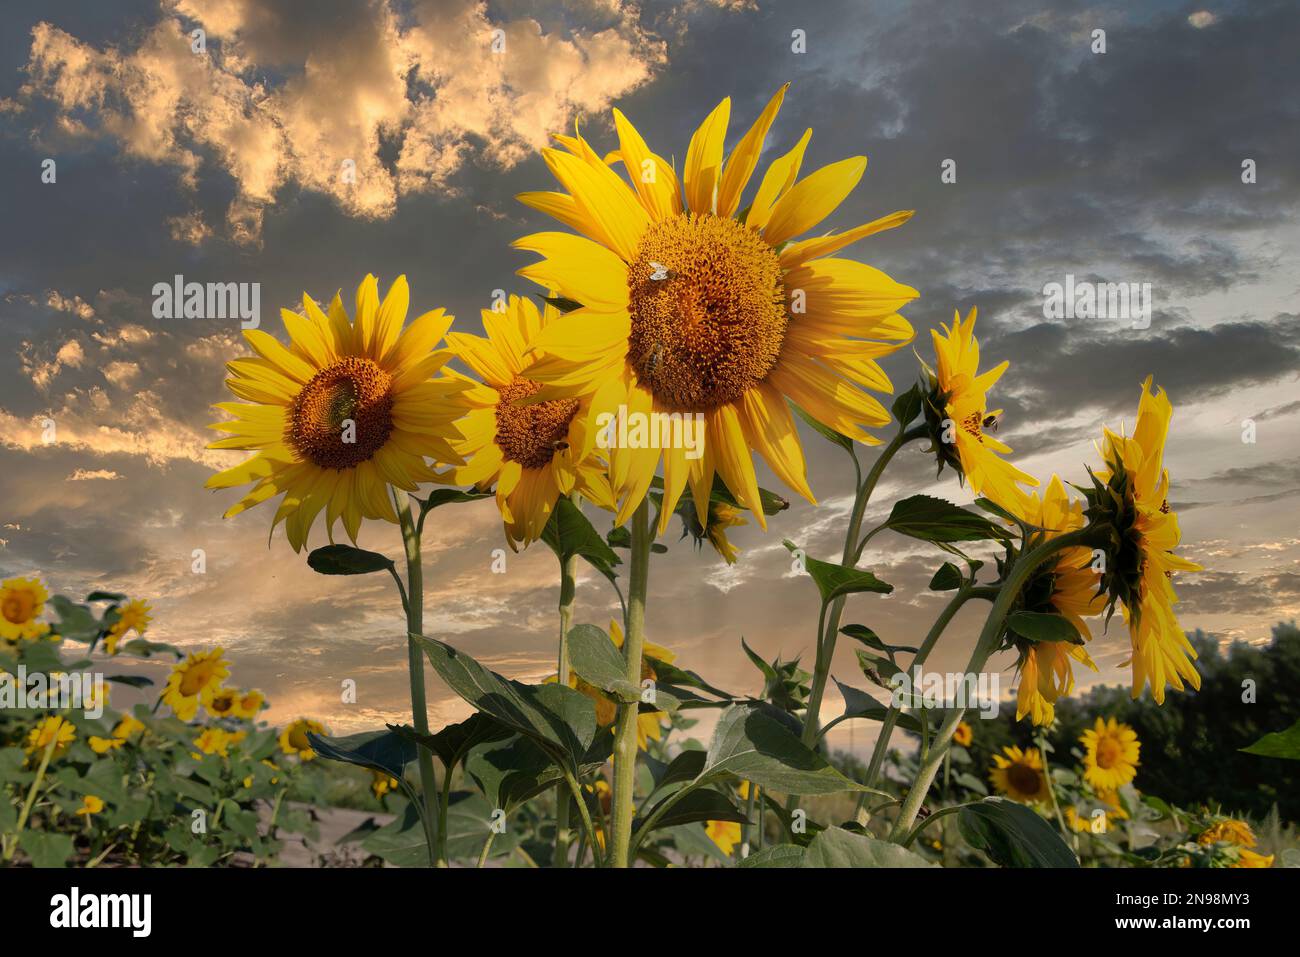 Colorful sunflowers with bees against the dramatic sunset sky Stock Photo